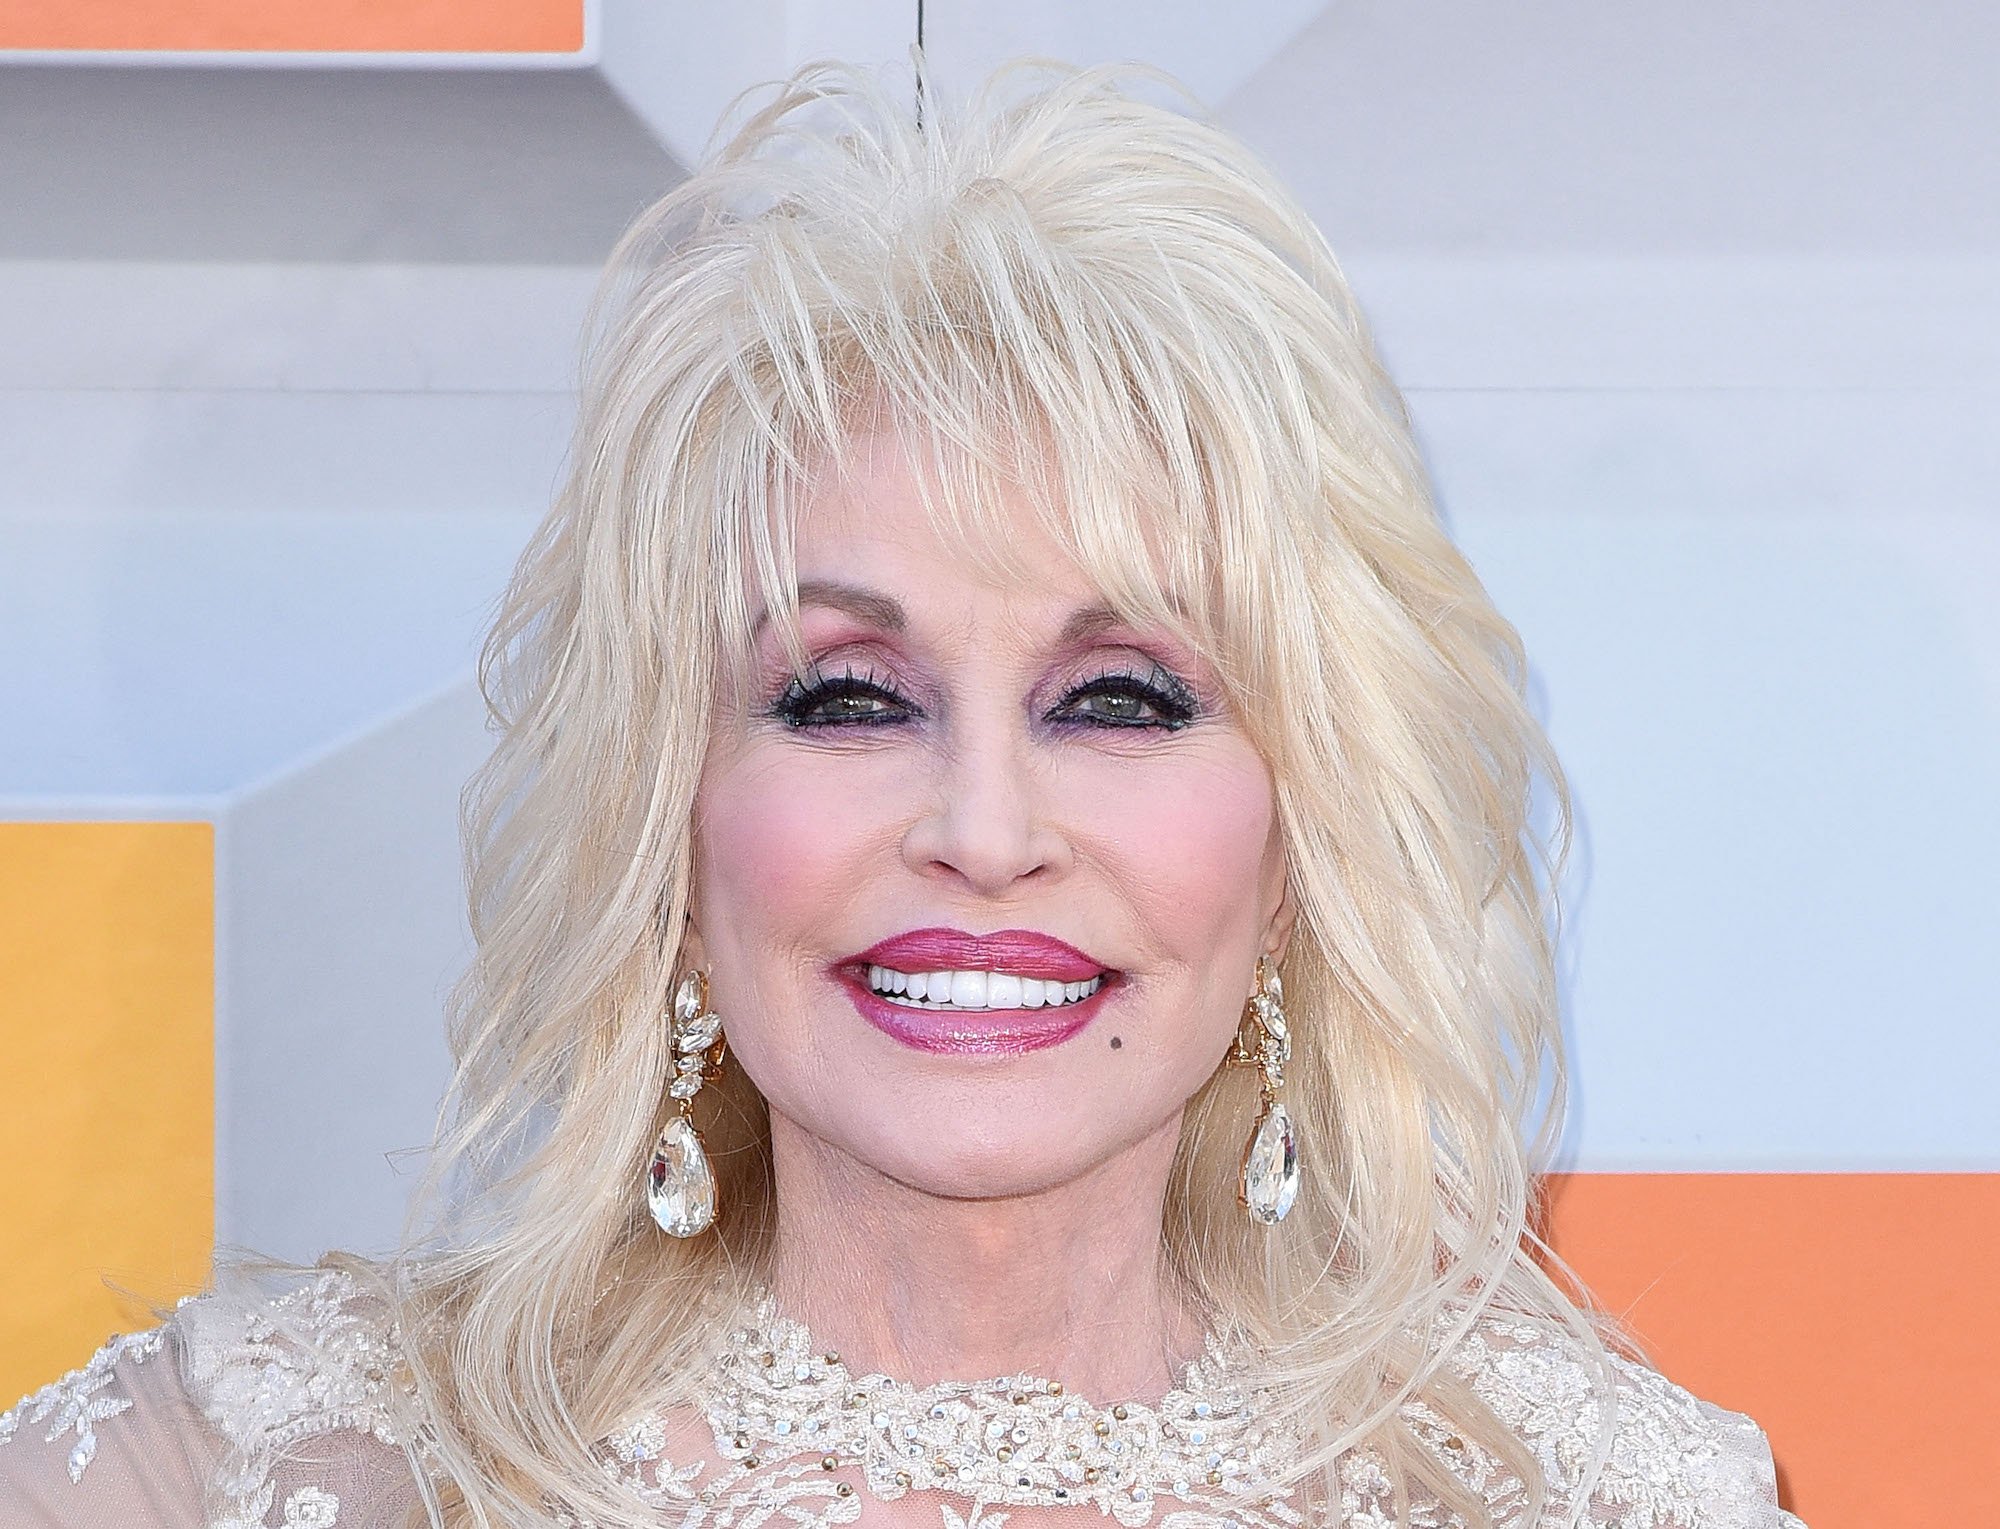 Dolly Parton posing on the red carpet at the 51st Academy Of Country Music Awards in 2016